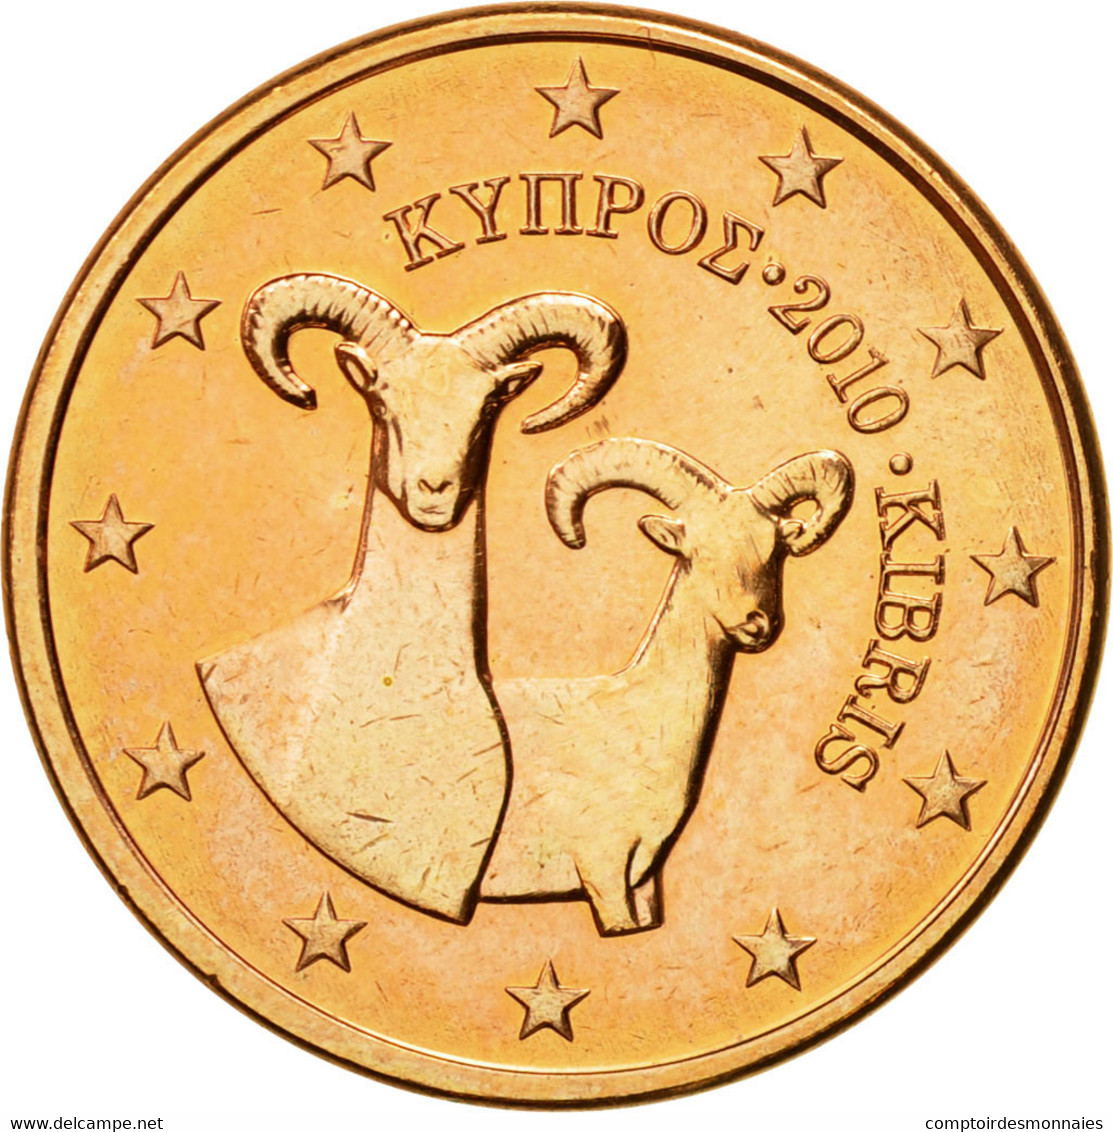 Chypre, 5 Euro Cent, 2010, FDC, Copper Plated Steel, KM:80 - Chypre